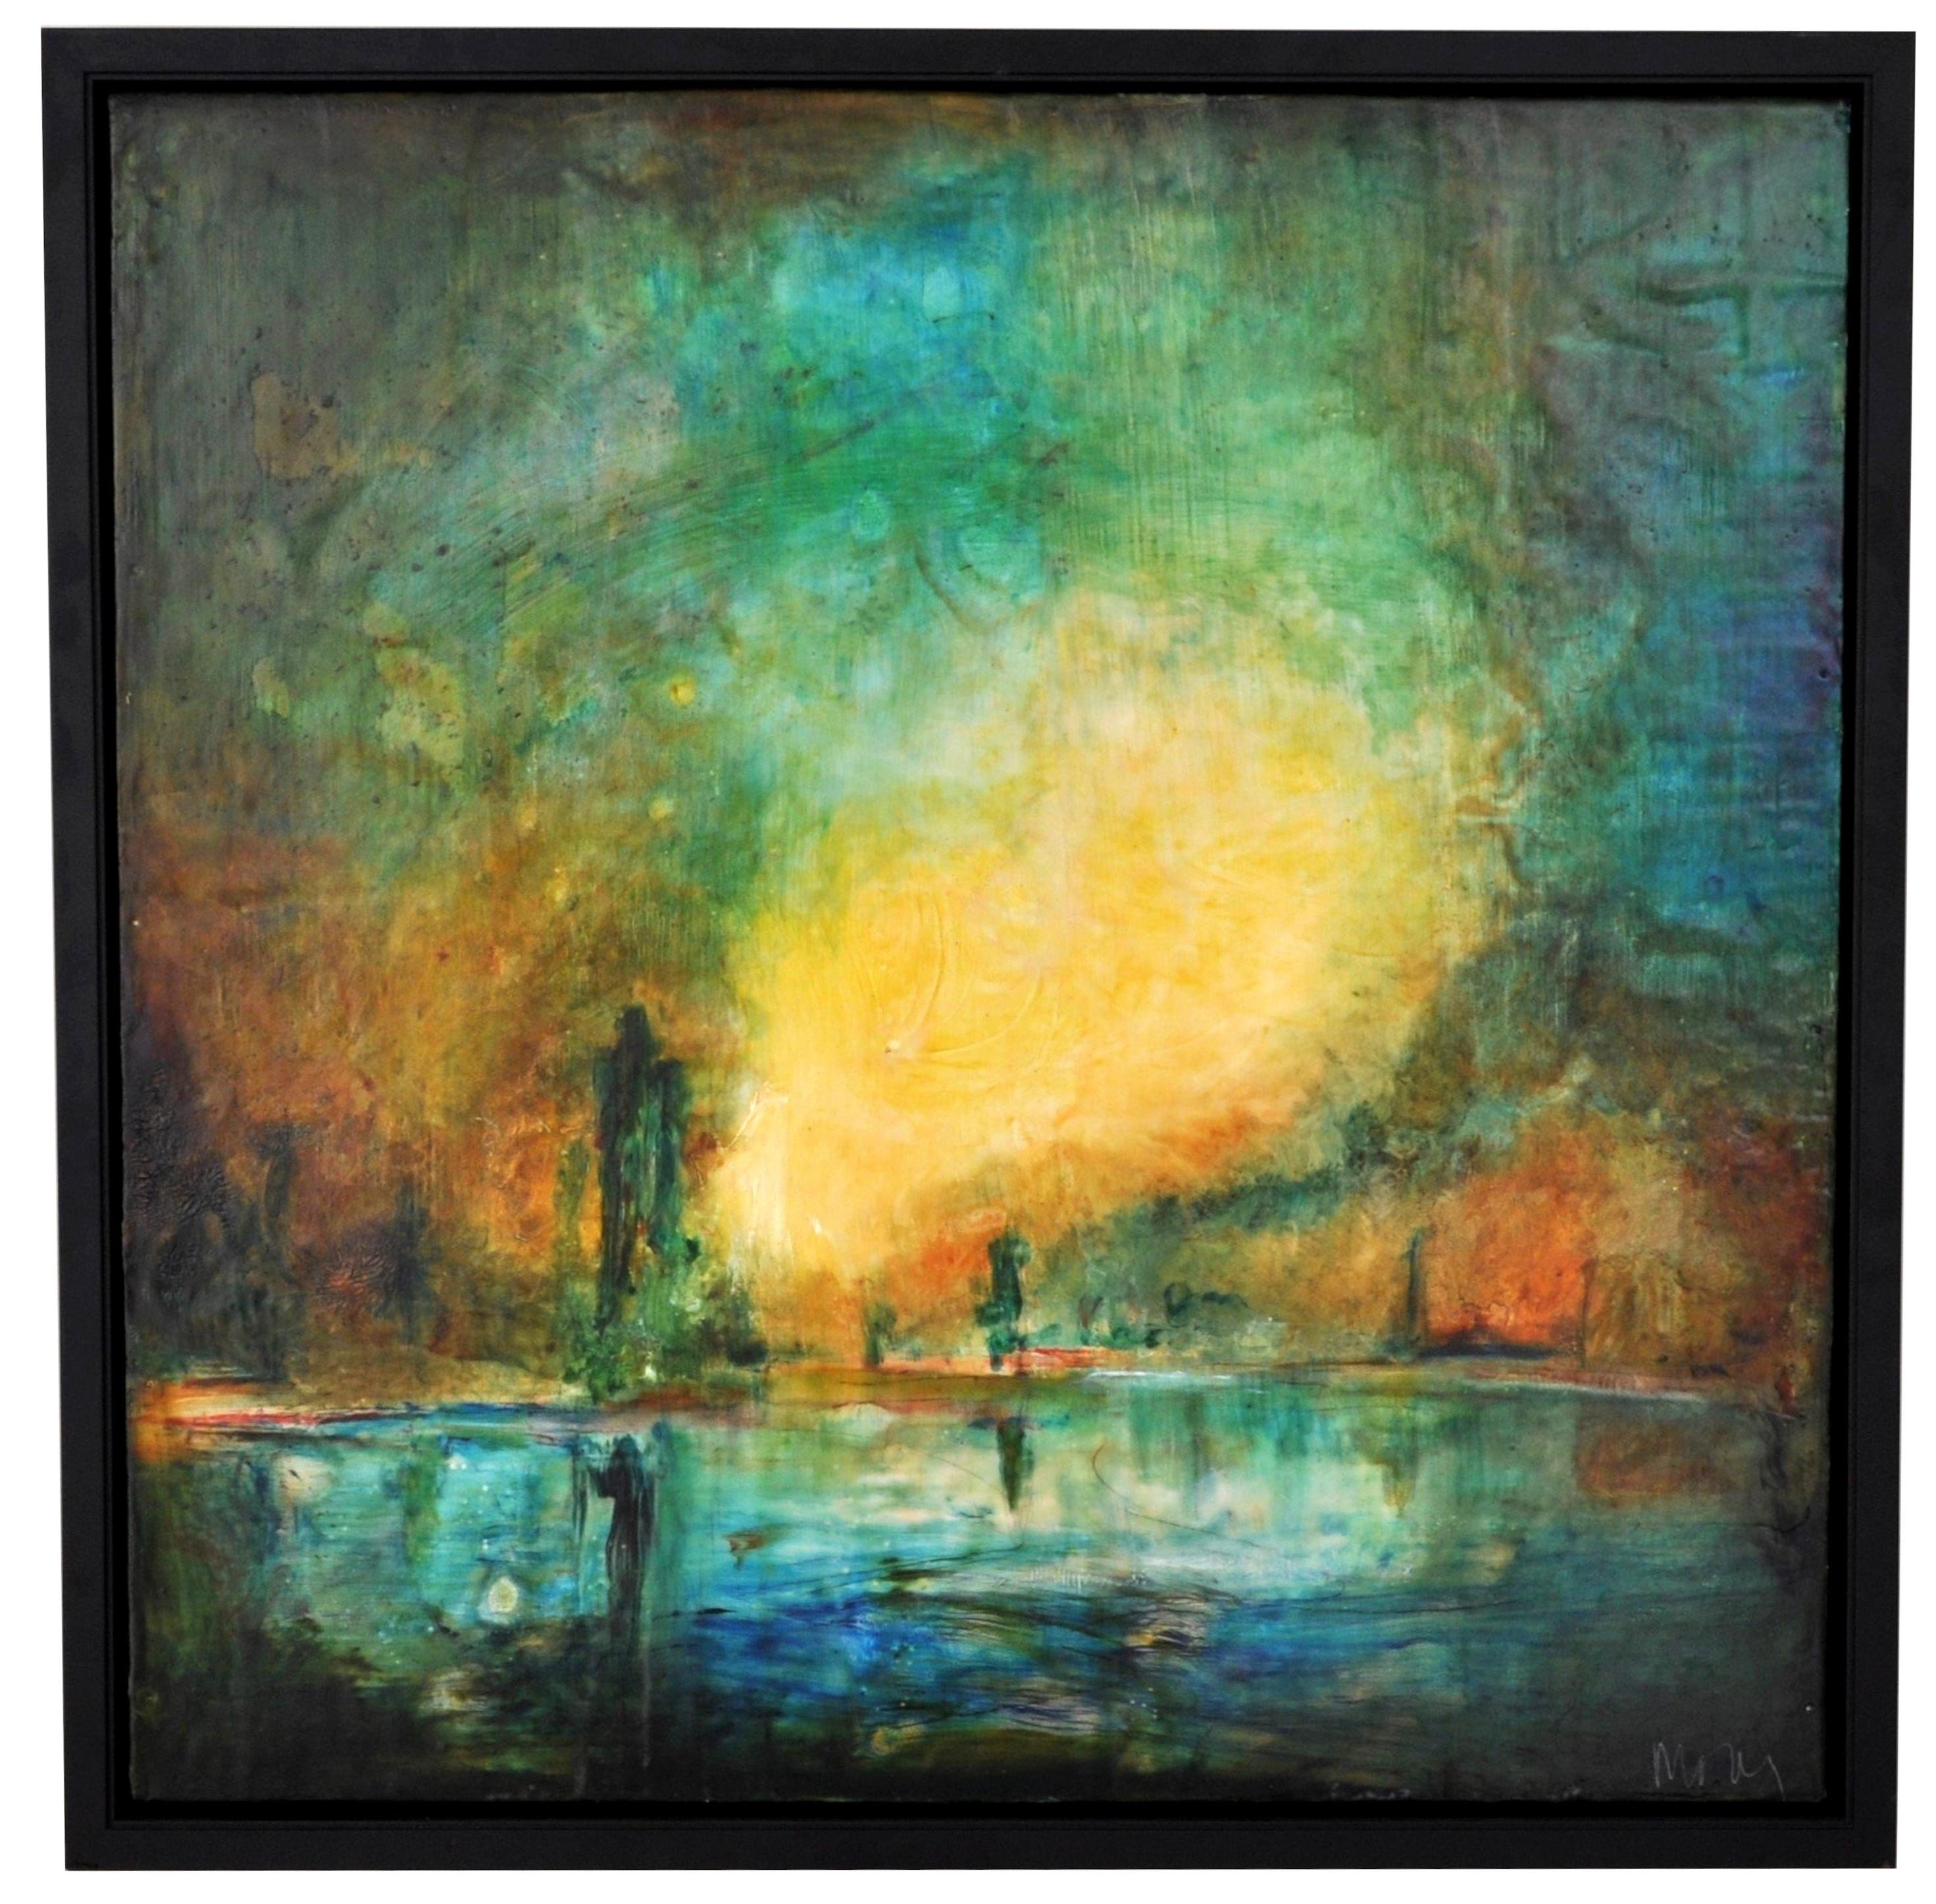 Molly Cliff Hilts Landscape Painting - Modernist Encaustic Painting "New Orleans" Pacific Northwest Artist Molly Hilts